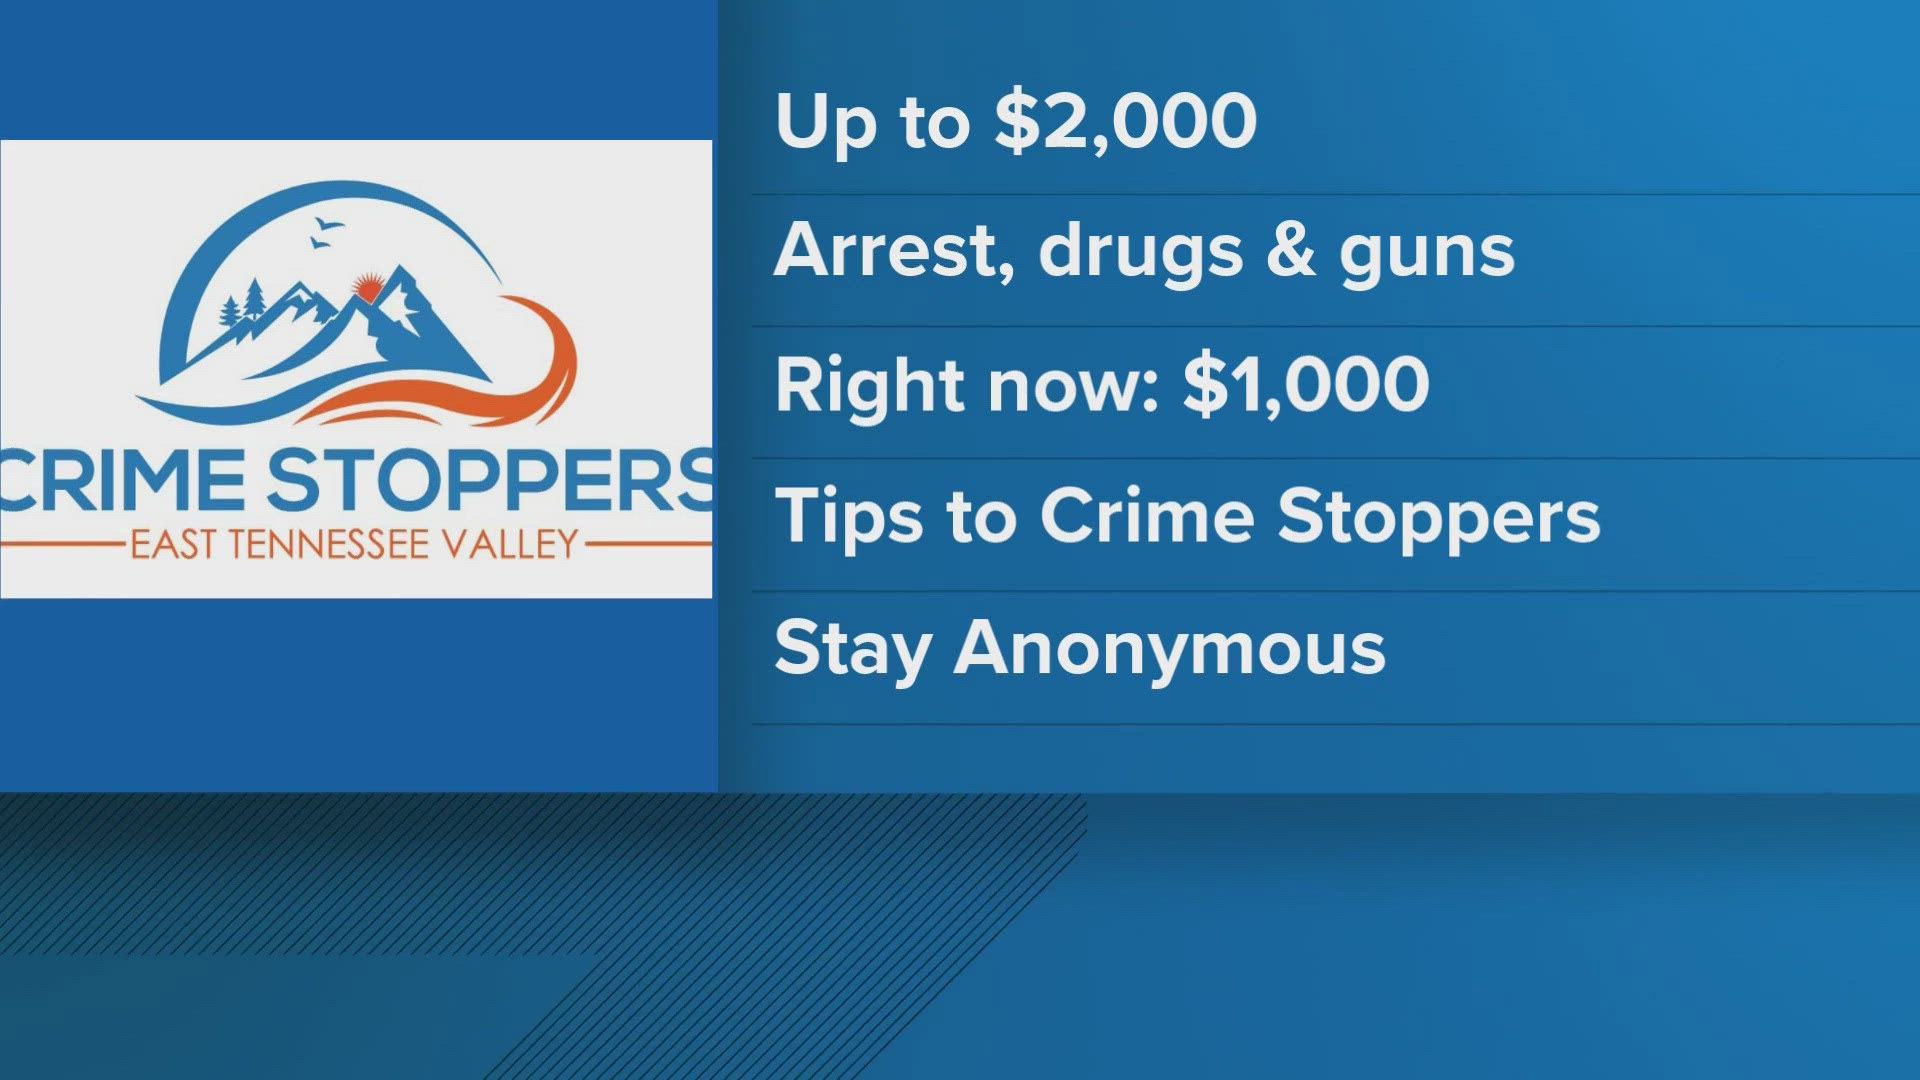 To be eligible for a reward, your tip has to be given directly to Crime Stoppers.